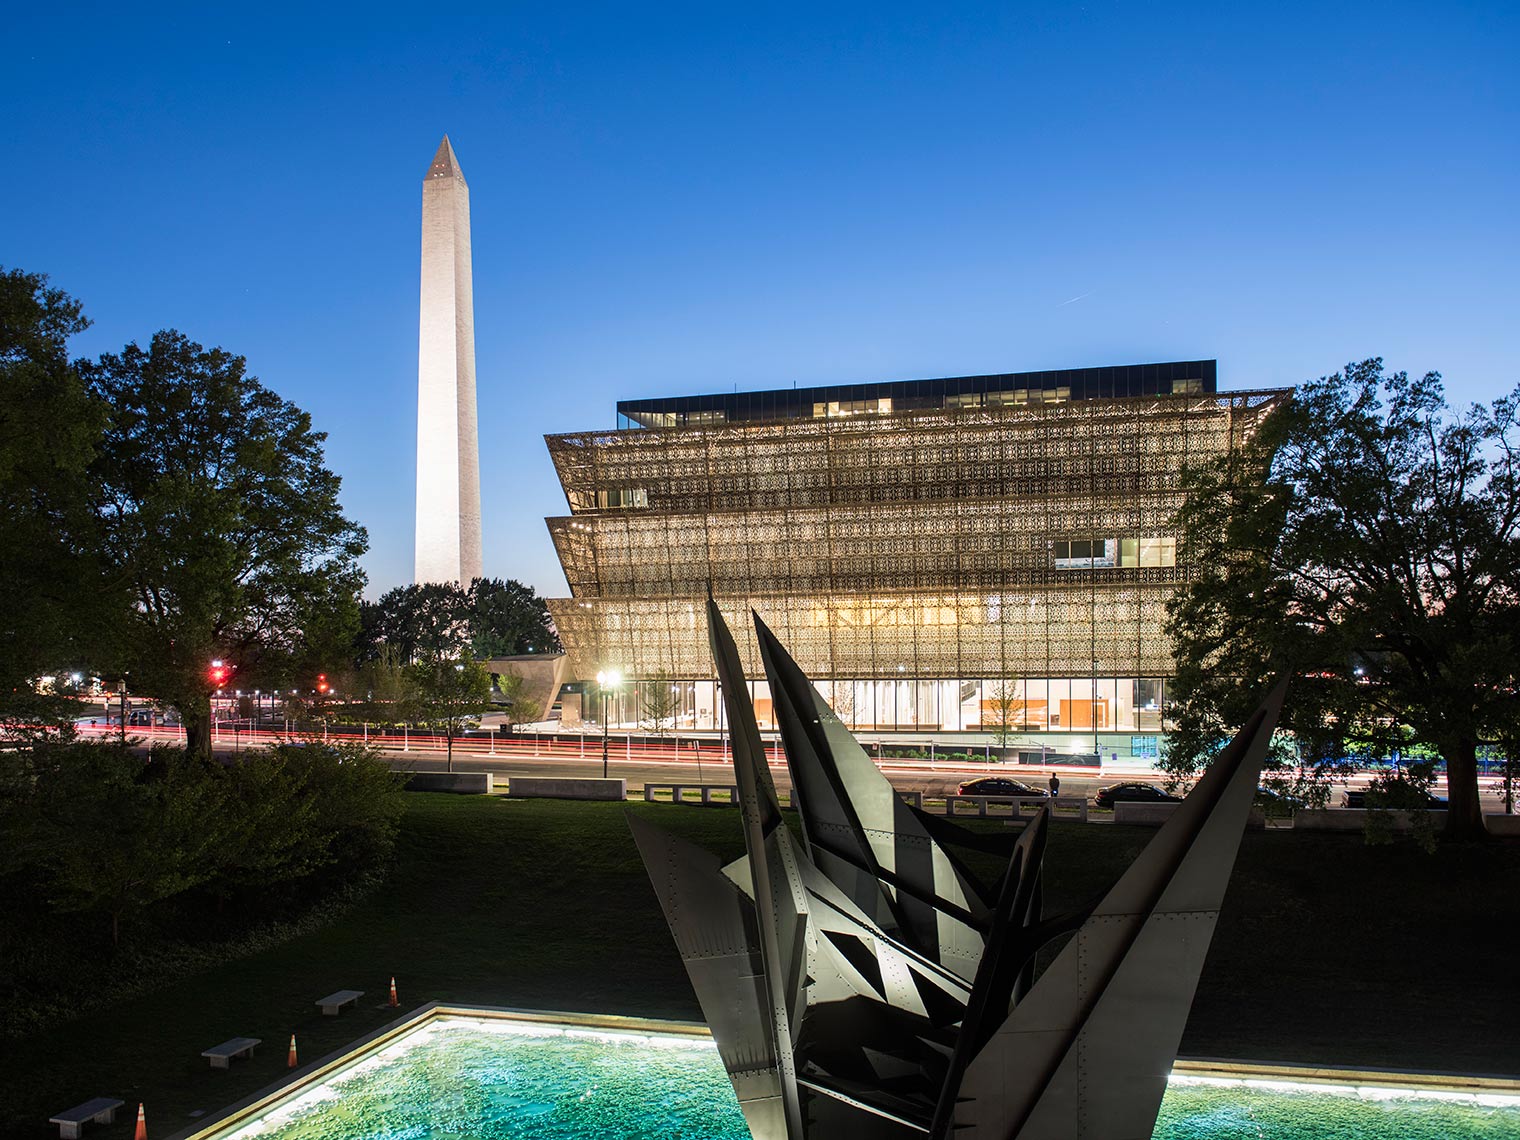 National Museum of African American History and Culture - Designed by David Adjaye